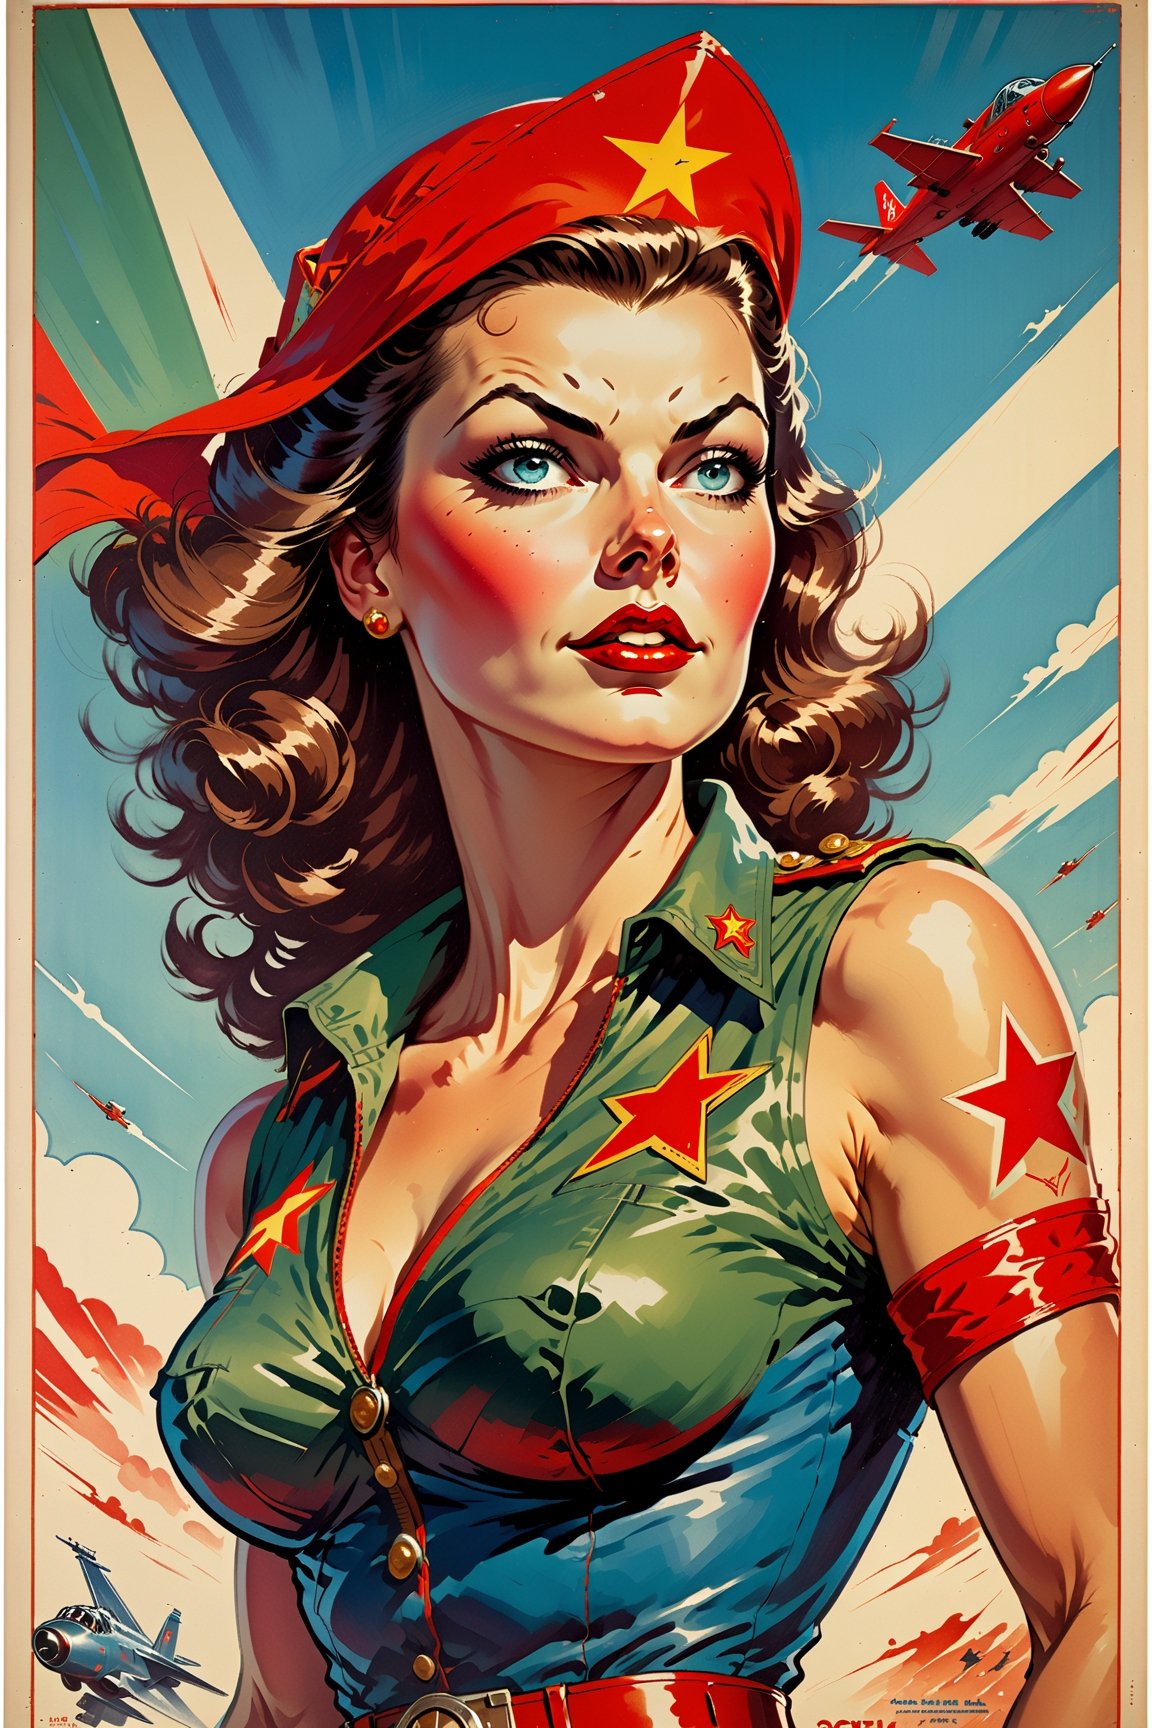 American World War II poster, Gil Elvgren style ((CCCP poster, Soviet poster)) (a medium-sized dark-haired woman with superhero outfit) Poster propaganda, poster, blue sky with fighter jet, hero uniform, 1girl, solo, good body, poster design, poster art style. 1980s, 1950s, 1960s, 1940s, basic color scheme, very colorful poster, colorful art, third rule, inspiring, woman, 1 mature girl, hair blowing in the wind, looking at the viewer, revolutionary, red and blue square background, thick legs, green eyes,Comic Book-Style 2d,2d